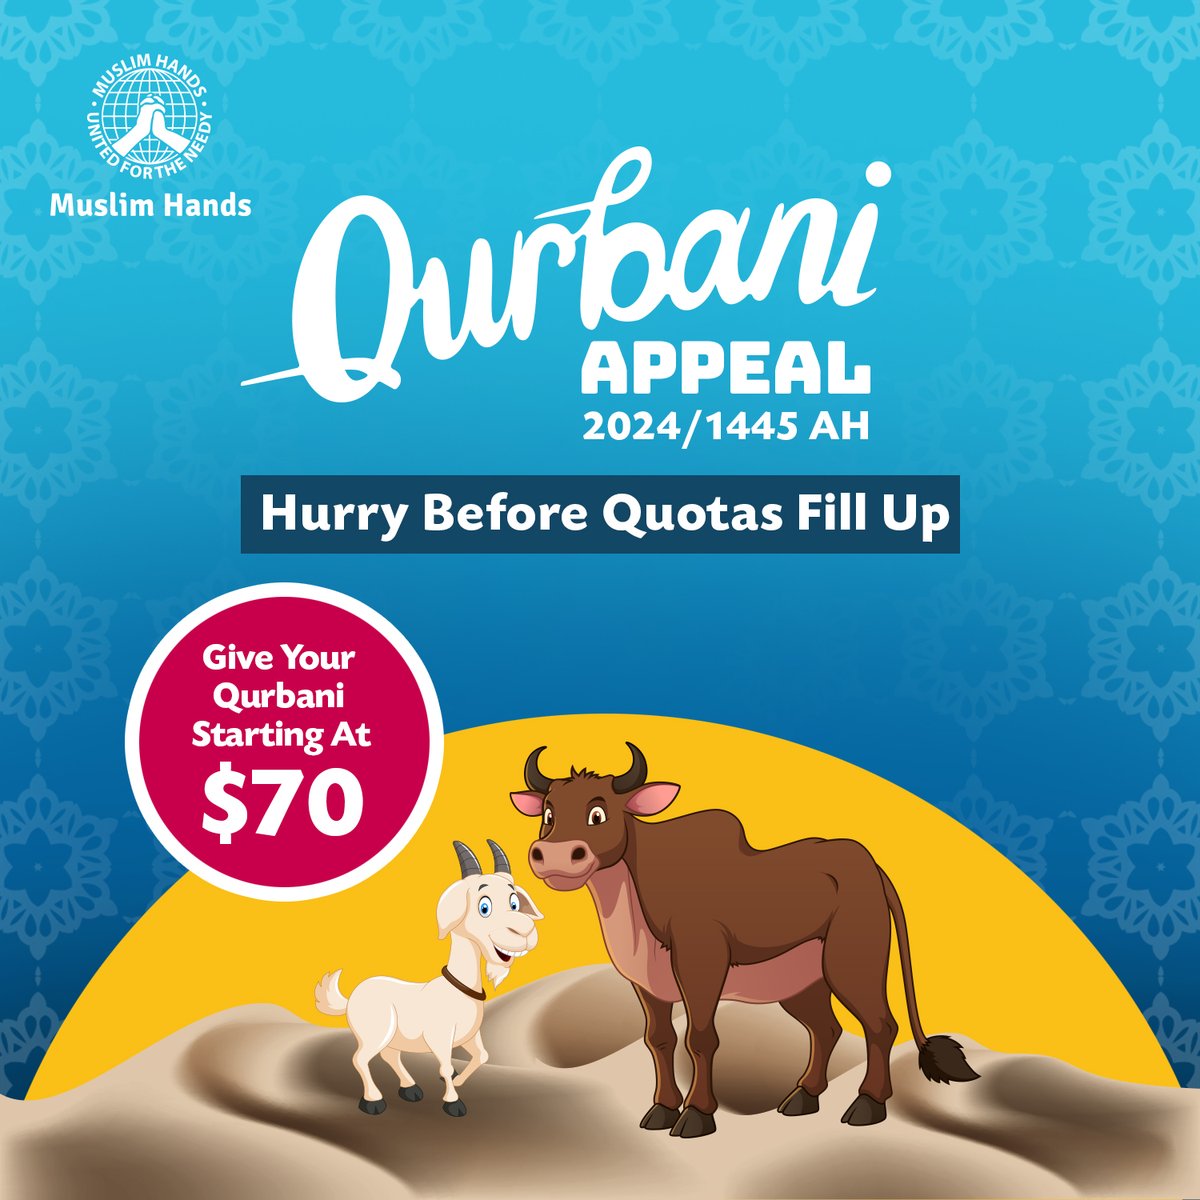 The Greatest Sacrifice is upon us! With Eid ul Adha just a few weeks away, make sure to give your Qurbani with Muslim Hands this year. 

#MuslimHandsUSA #EidUlAdha #Qurbani2024  #IslamicGiving #CharityAppeal #DonateToday #FaithInAction